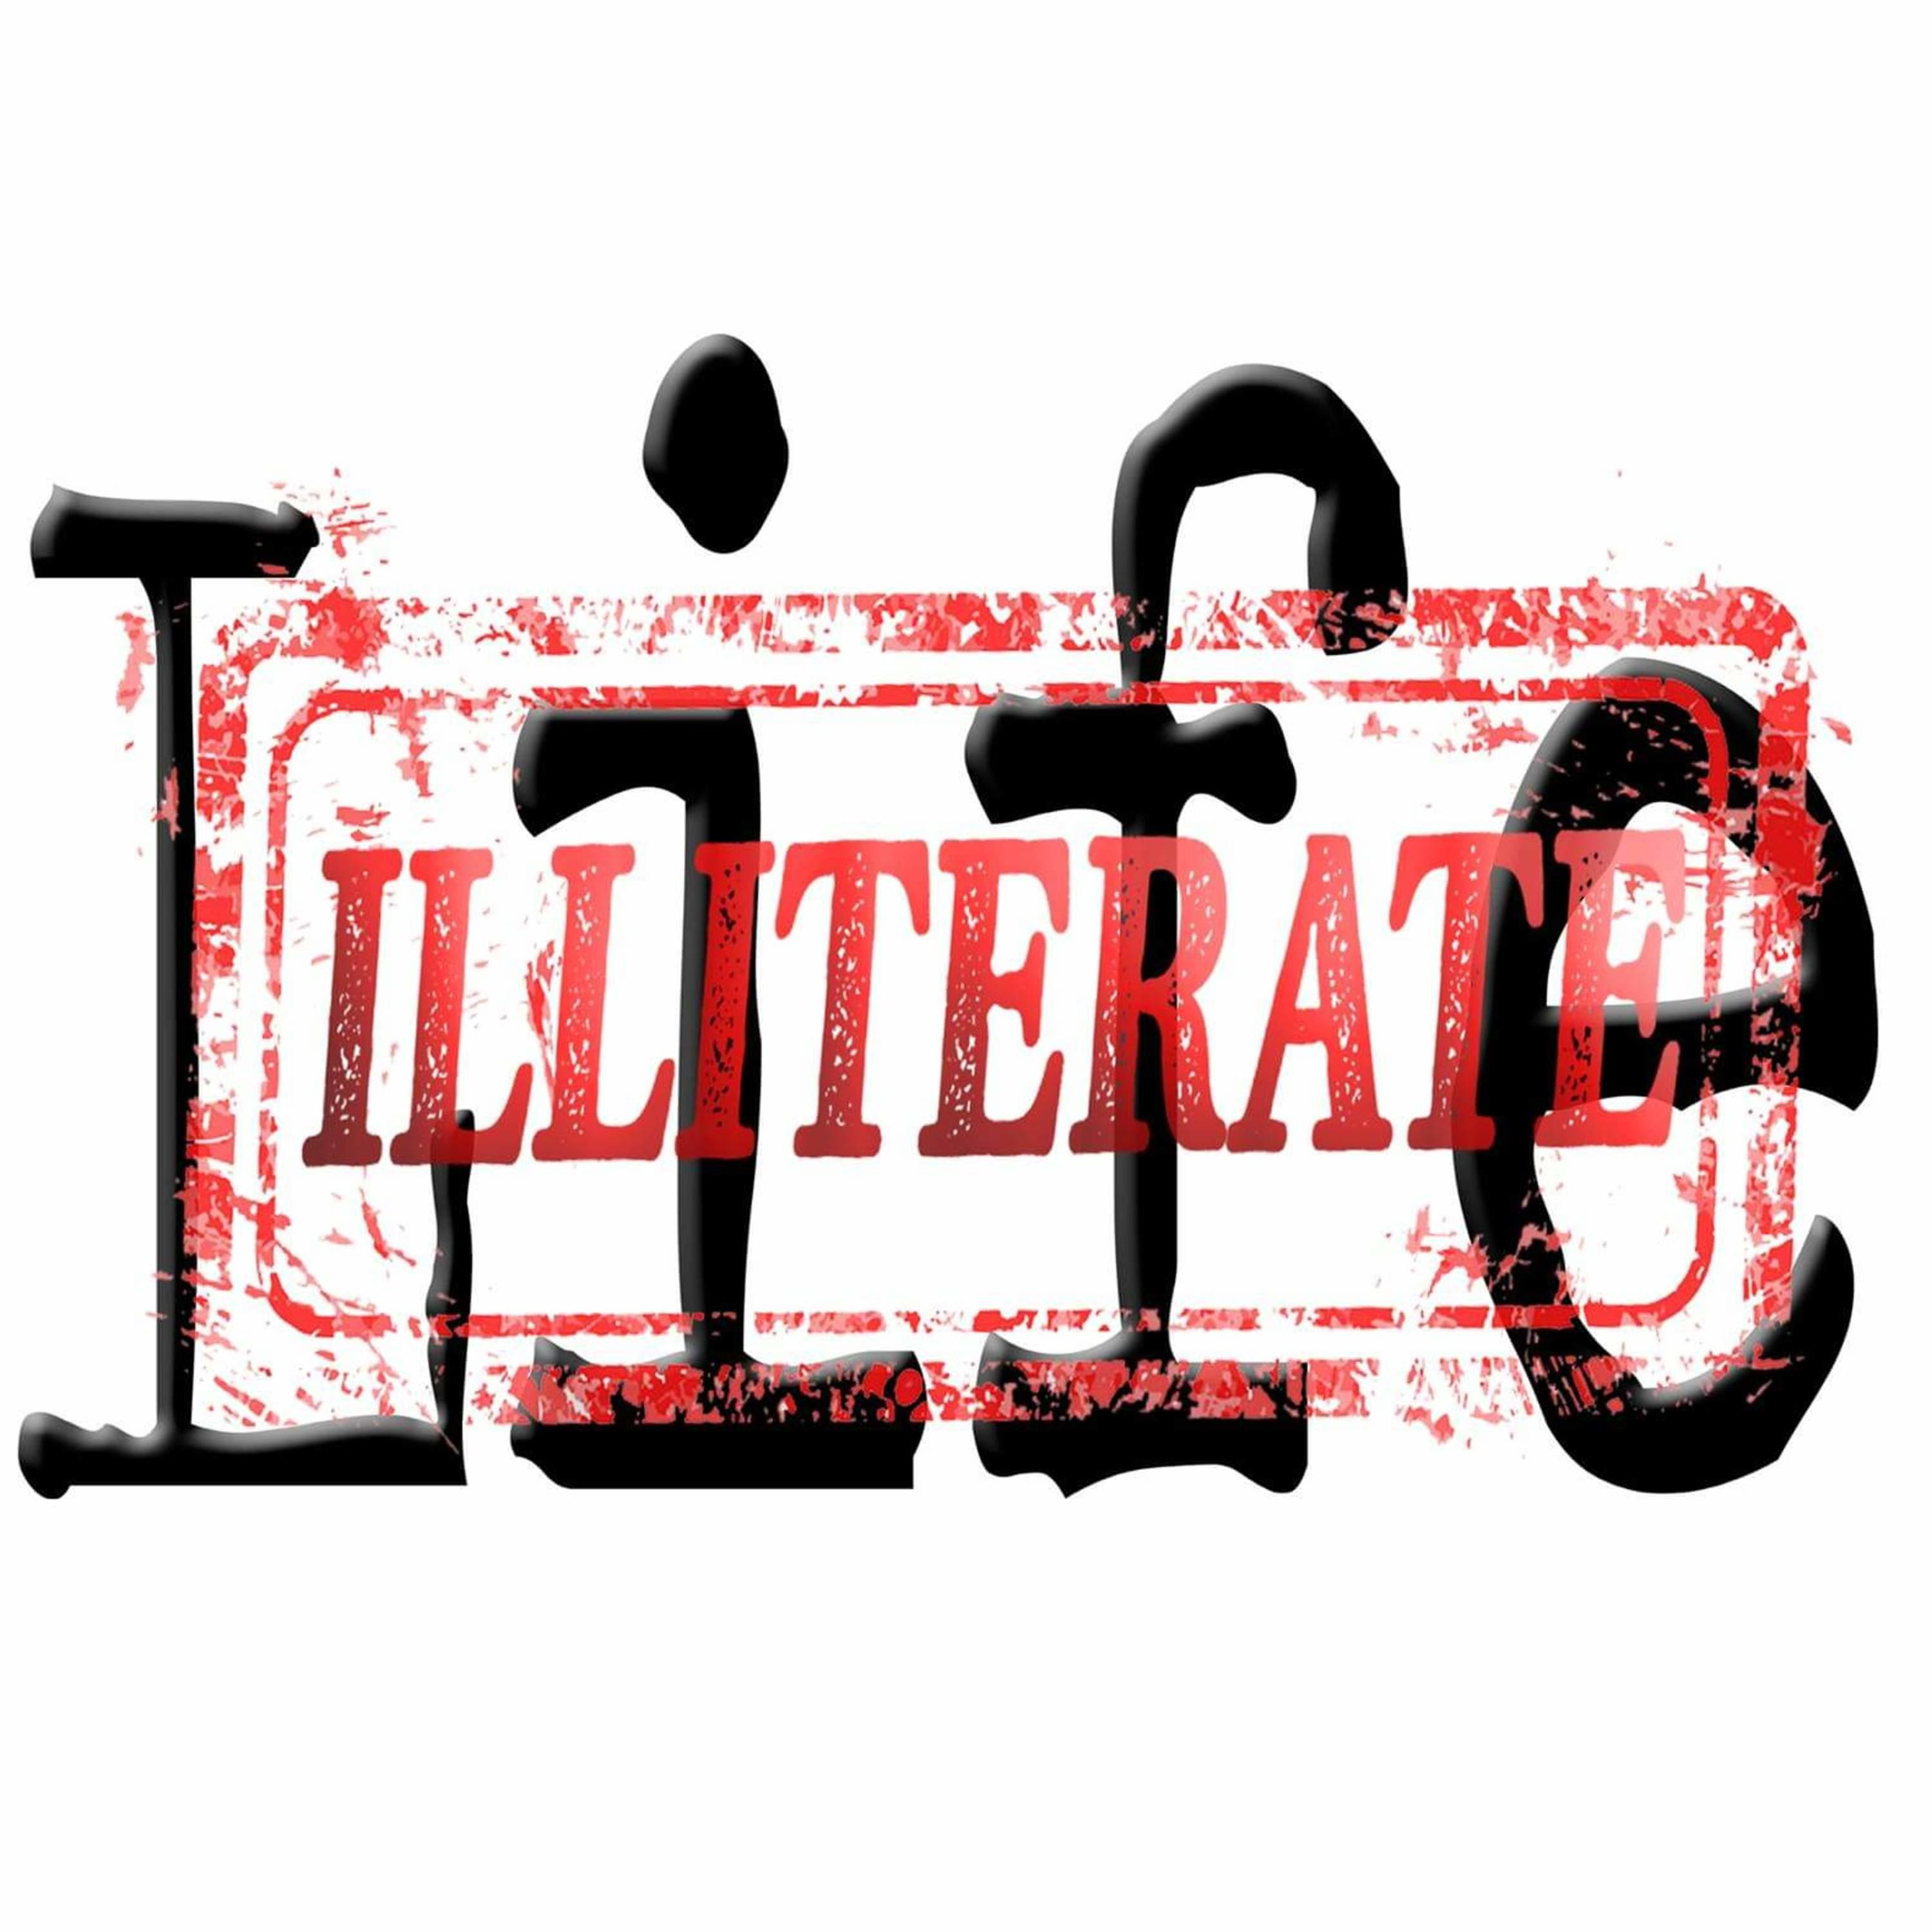 The Life Illiterate Podcast